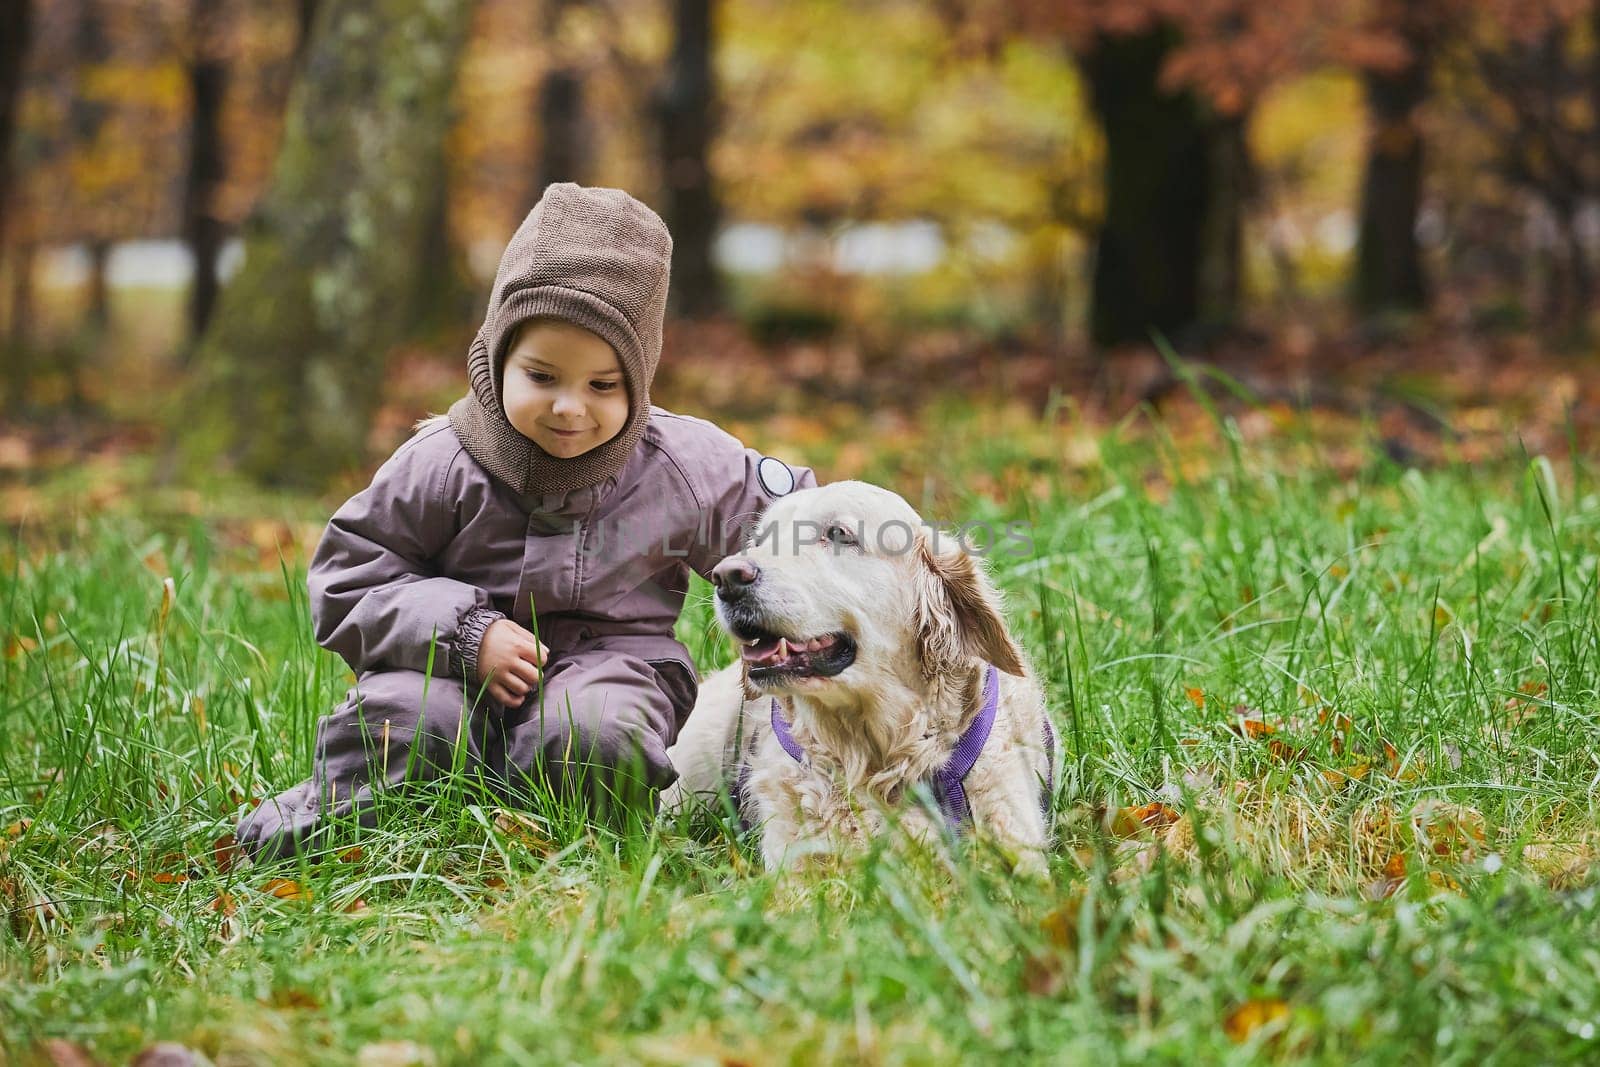 Charming child and dog walking in the forest in Denmark.